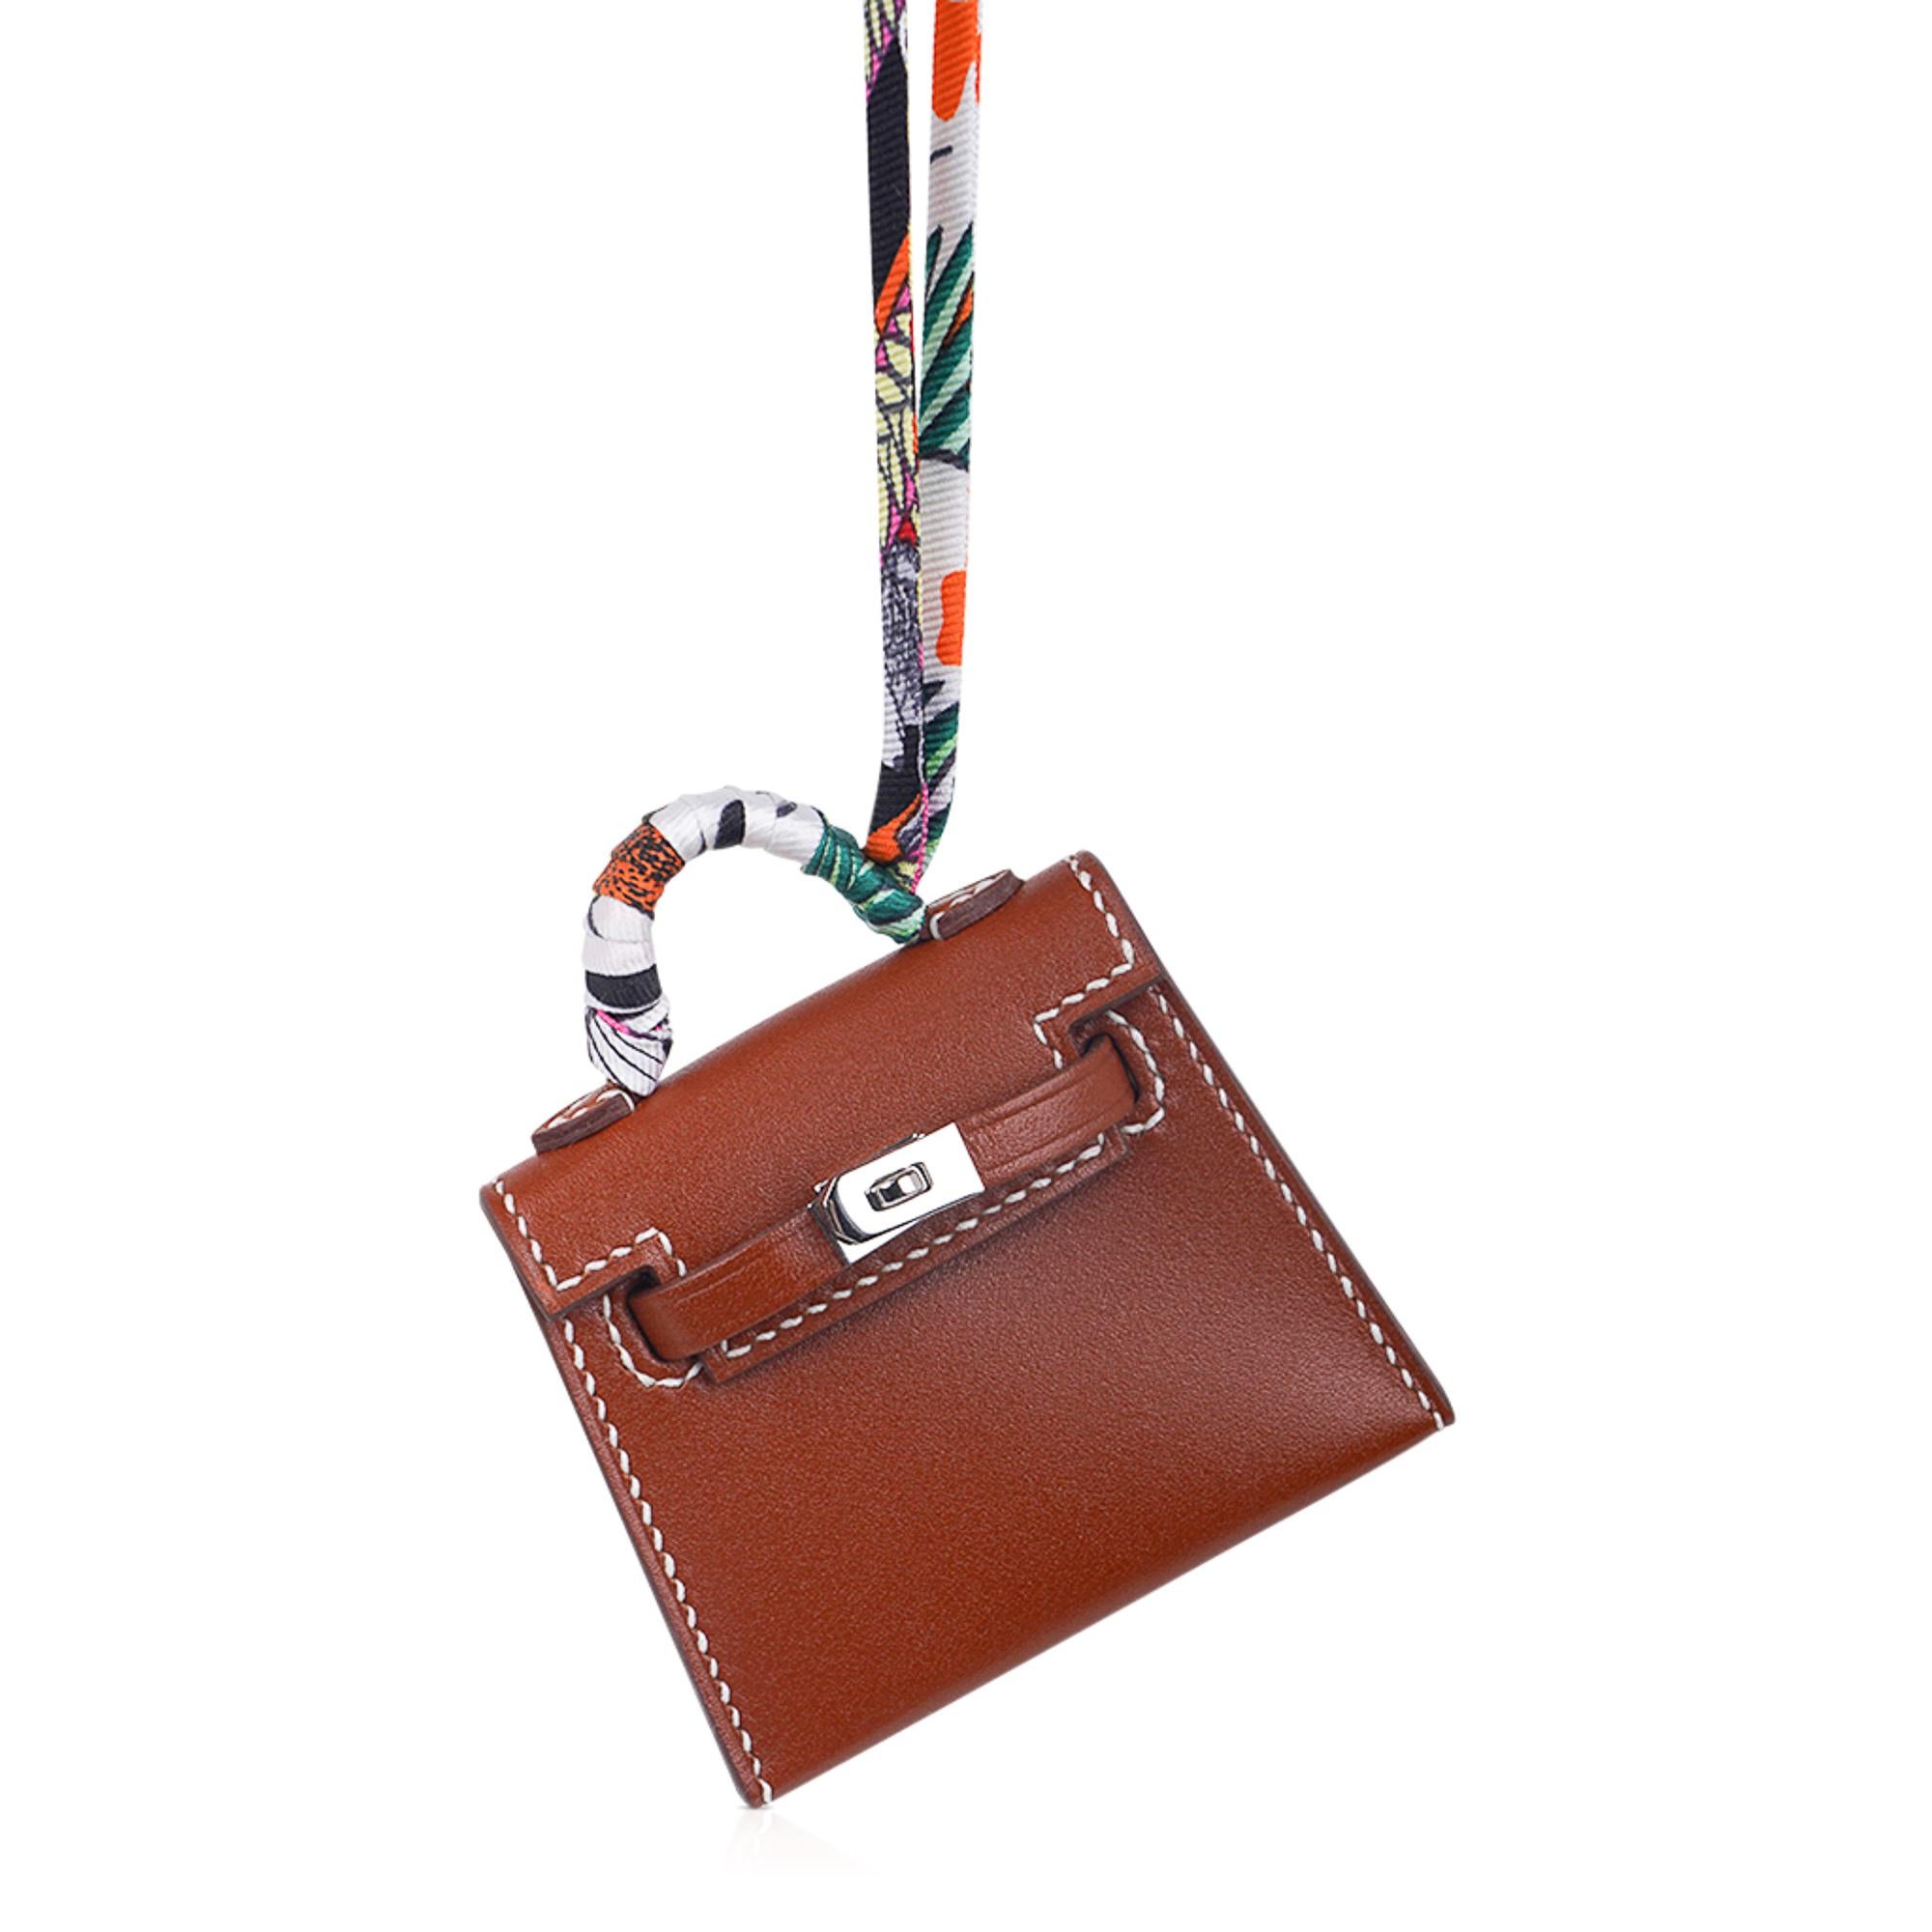 Mightychic offers a limited edition Hermes Kelly Twilly Bag Charm featured in Fauve with signature bone topstitch.
Shaped like a Kelly Bag crafted in Tadelakt leather with amazing detail with working hardware.
The charm has Palladium hardware and a